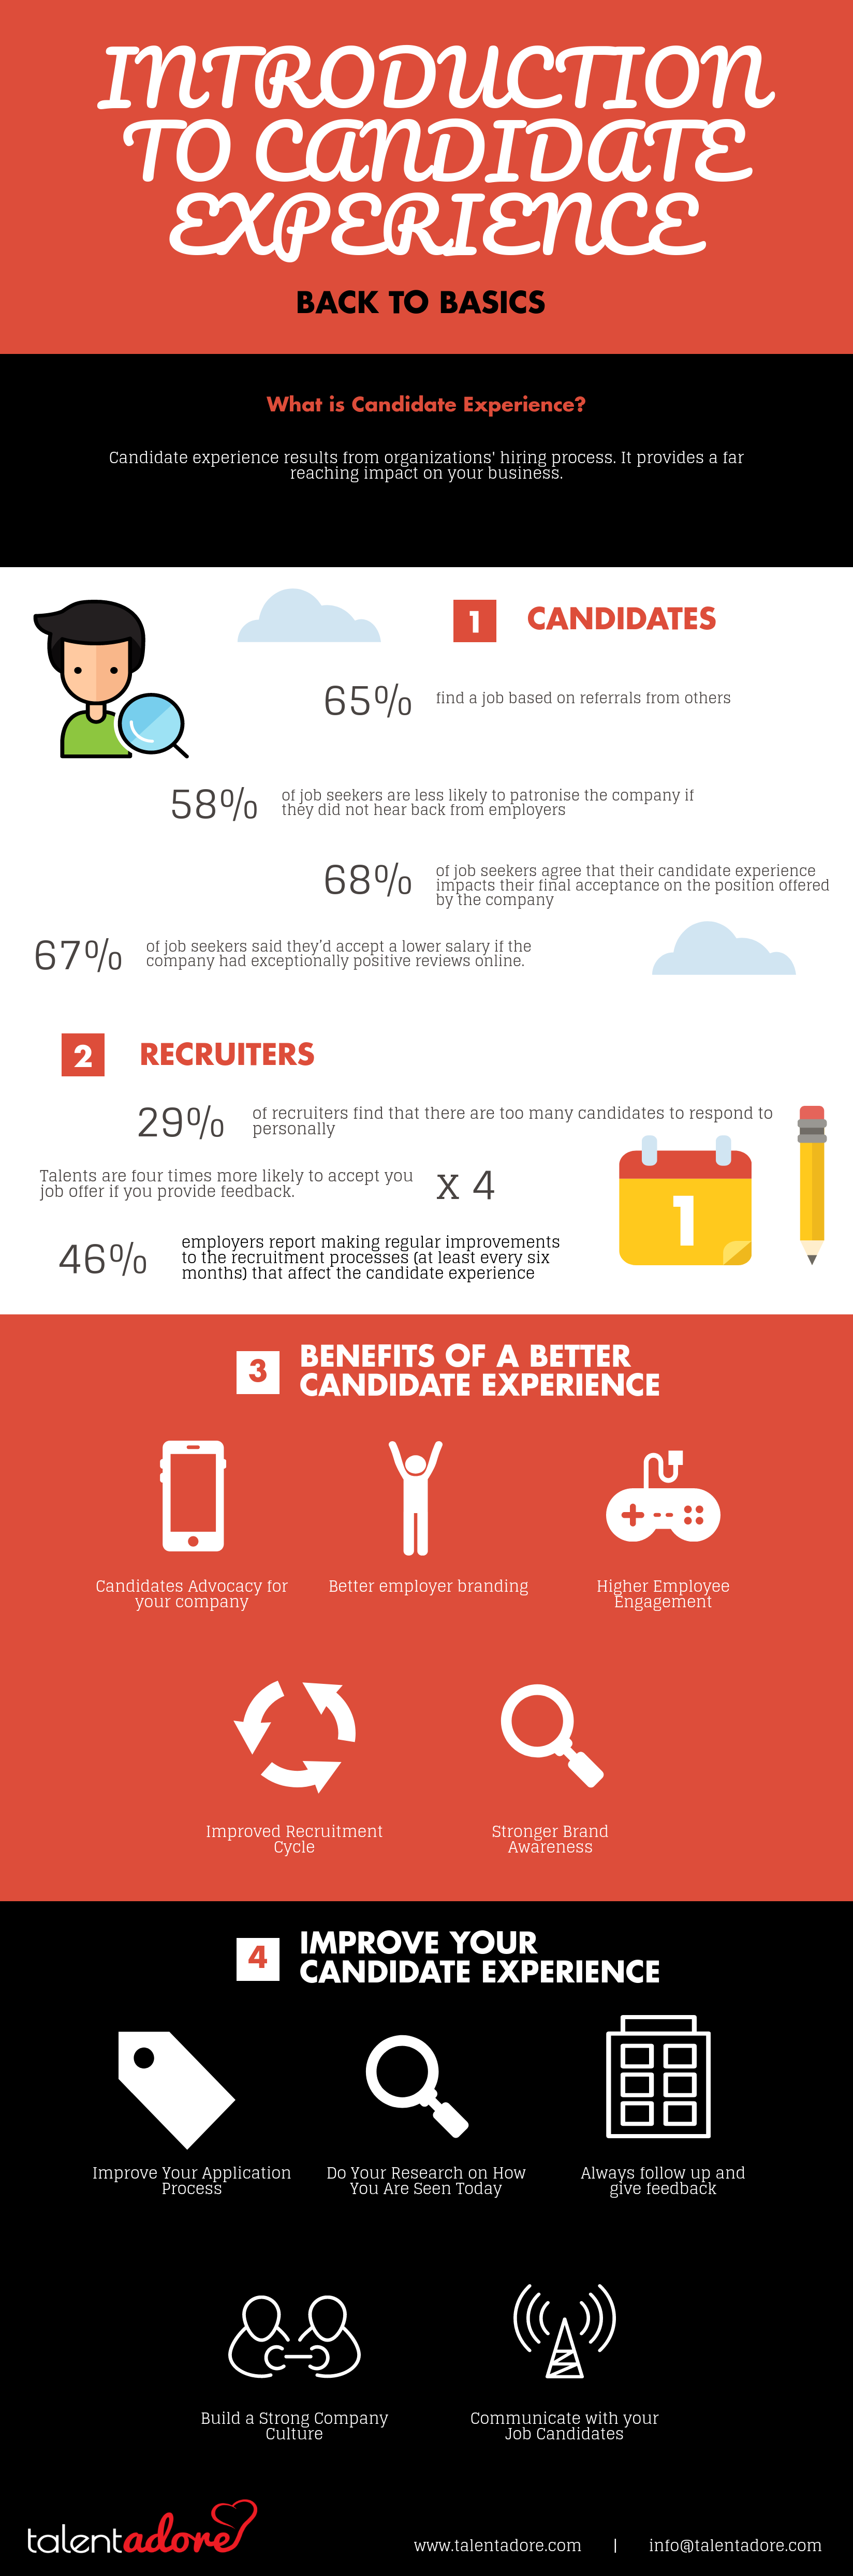 Candidate Experience infographic